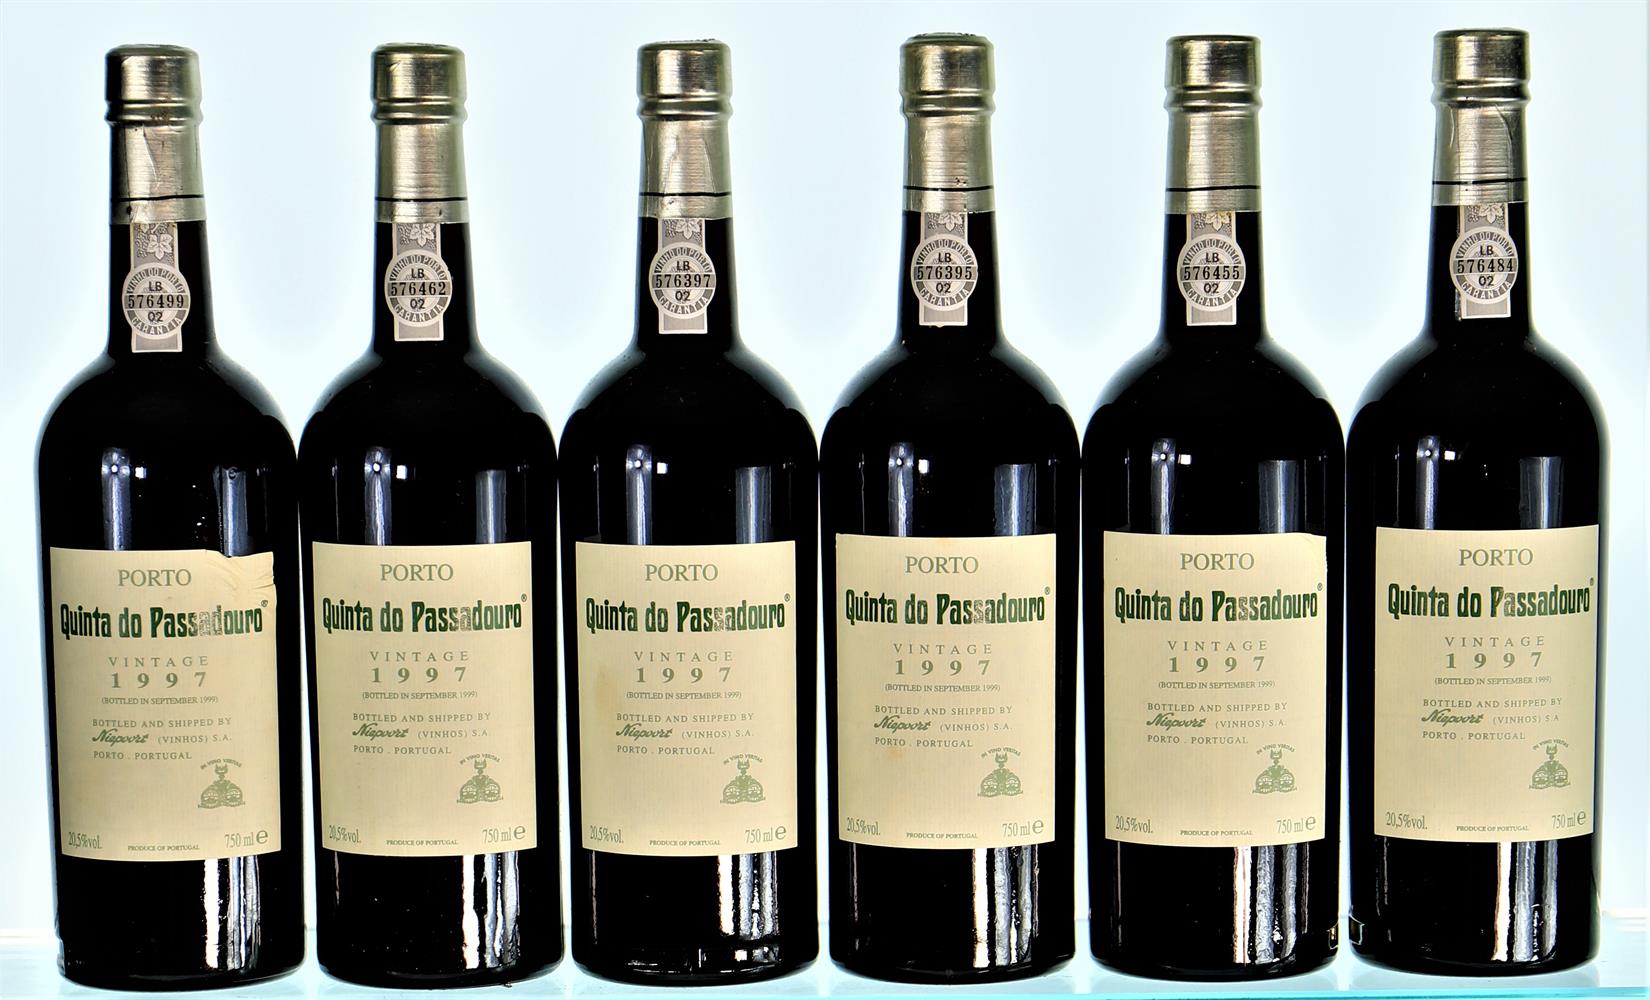 1997 Quinta do Passadouro, Bottled and Shipped By Niepoort